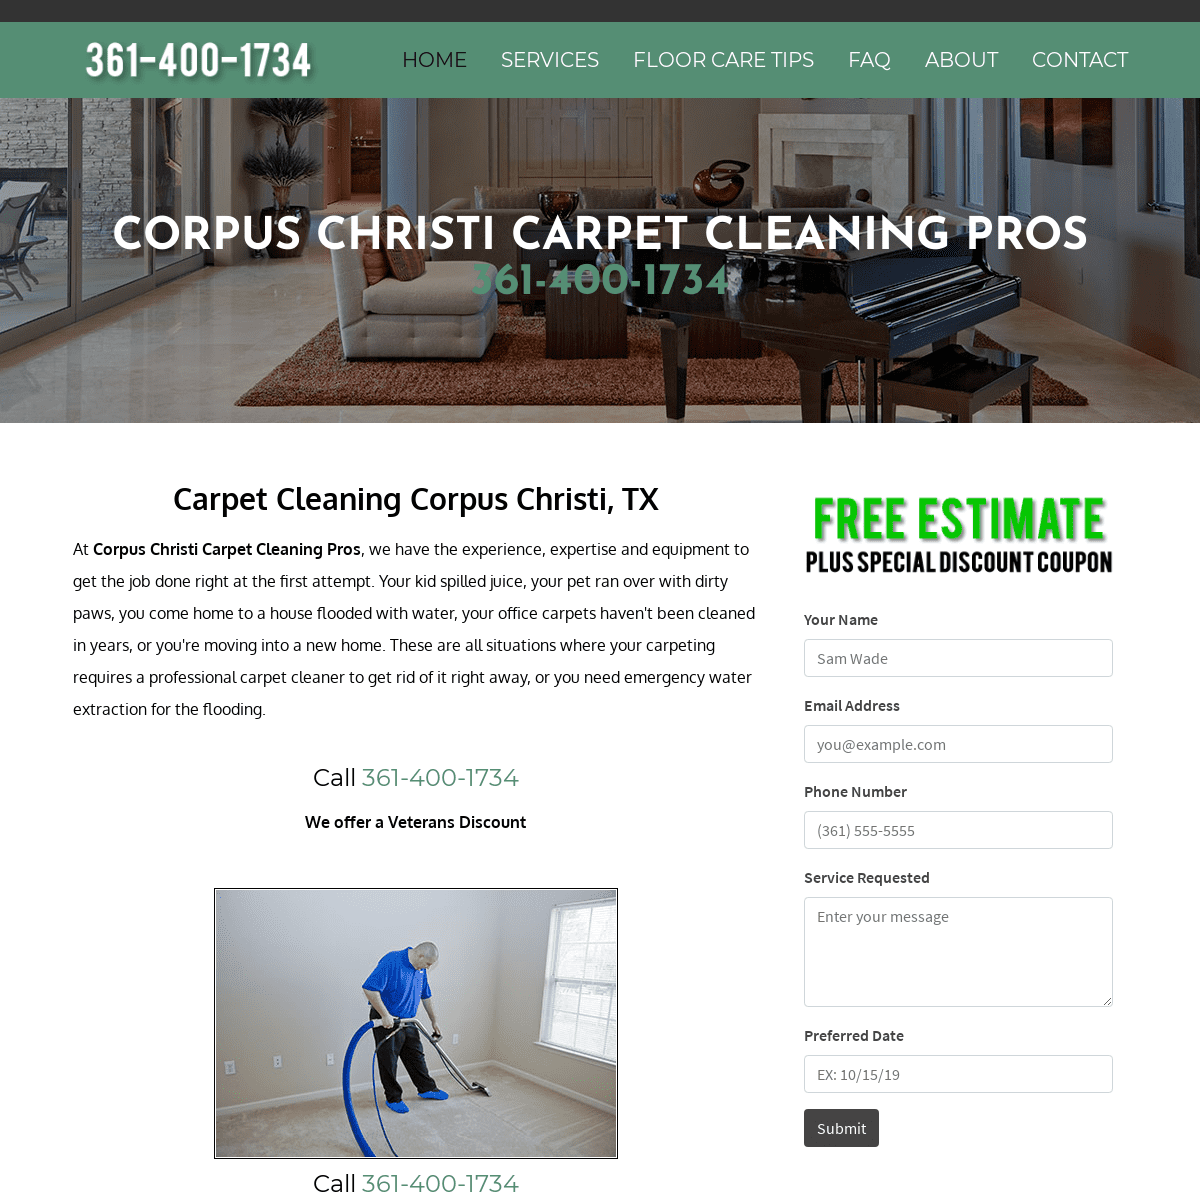 A complete backup of corpuschristicarpetcleaningpros.com